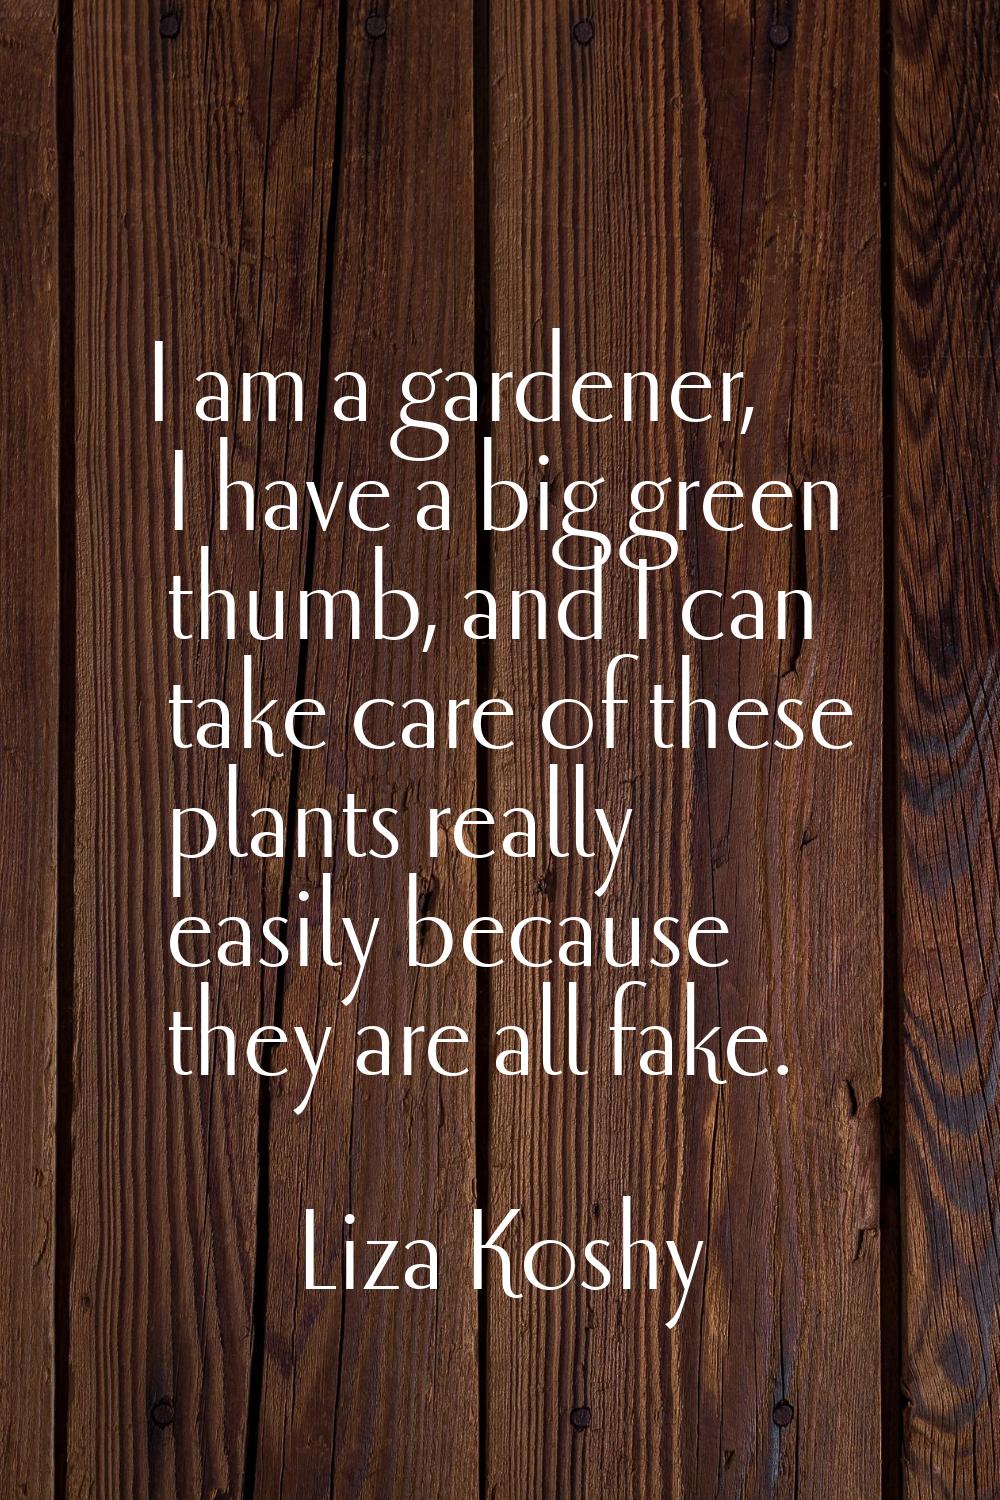 I am a gardener, I have a big green thumb, and I can take care of these plants really easily becaus